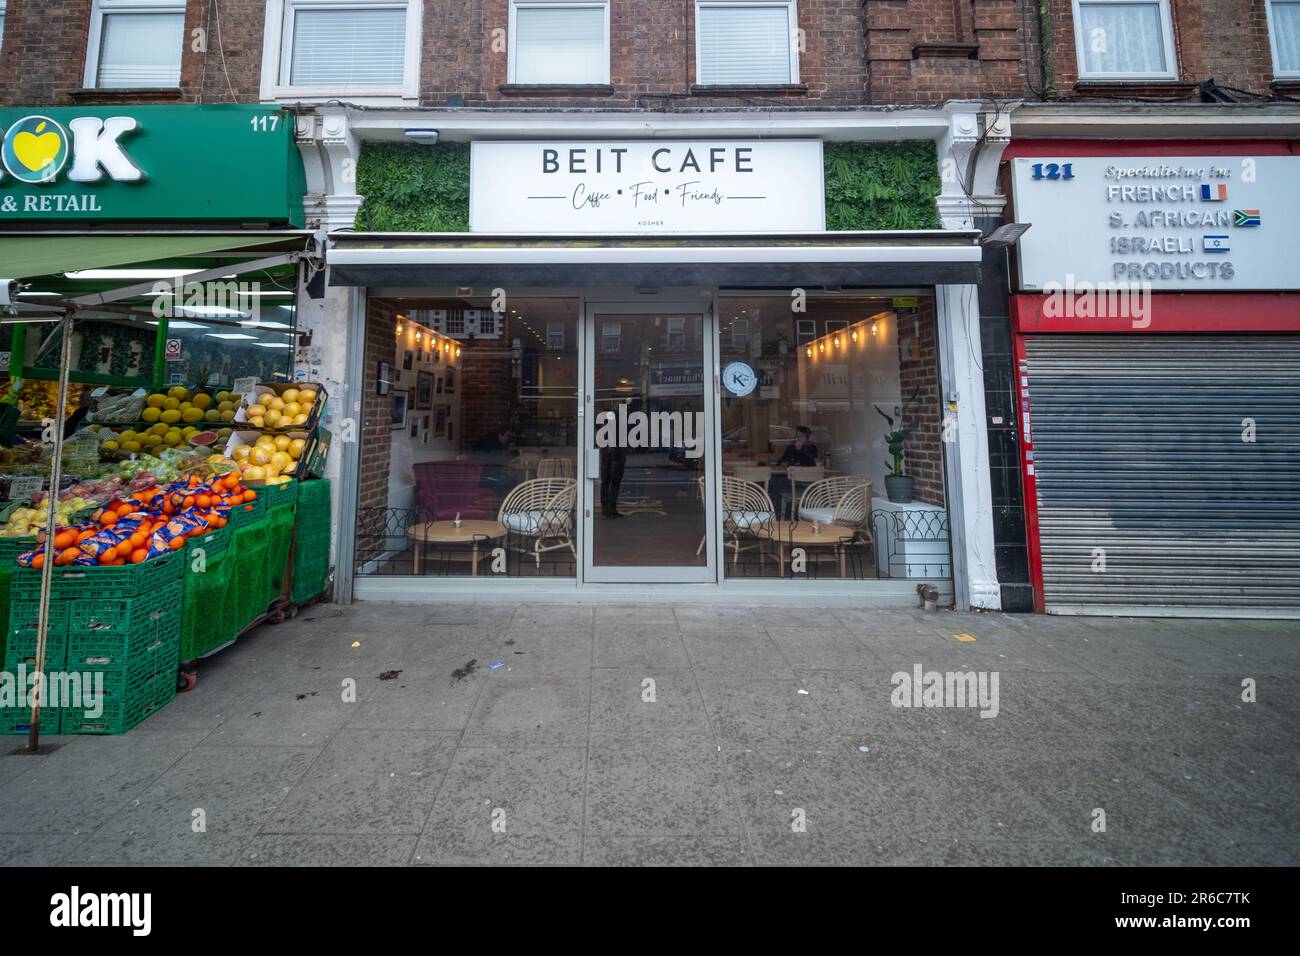 London- March 2023: High street shop in Golders Green, an area of North London with a large Jewish population Stock Photo